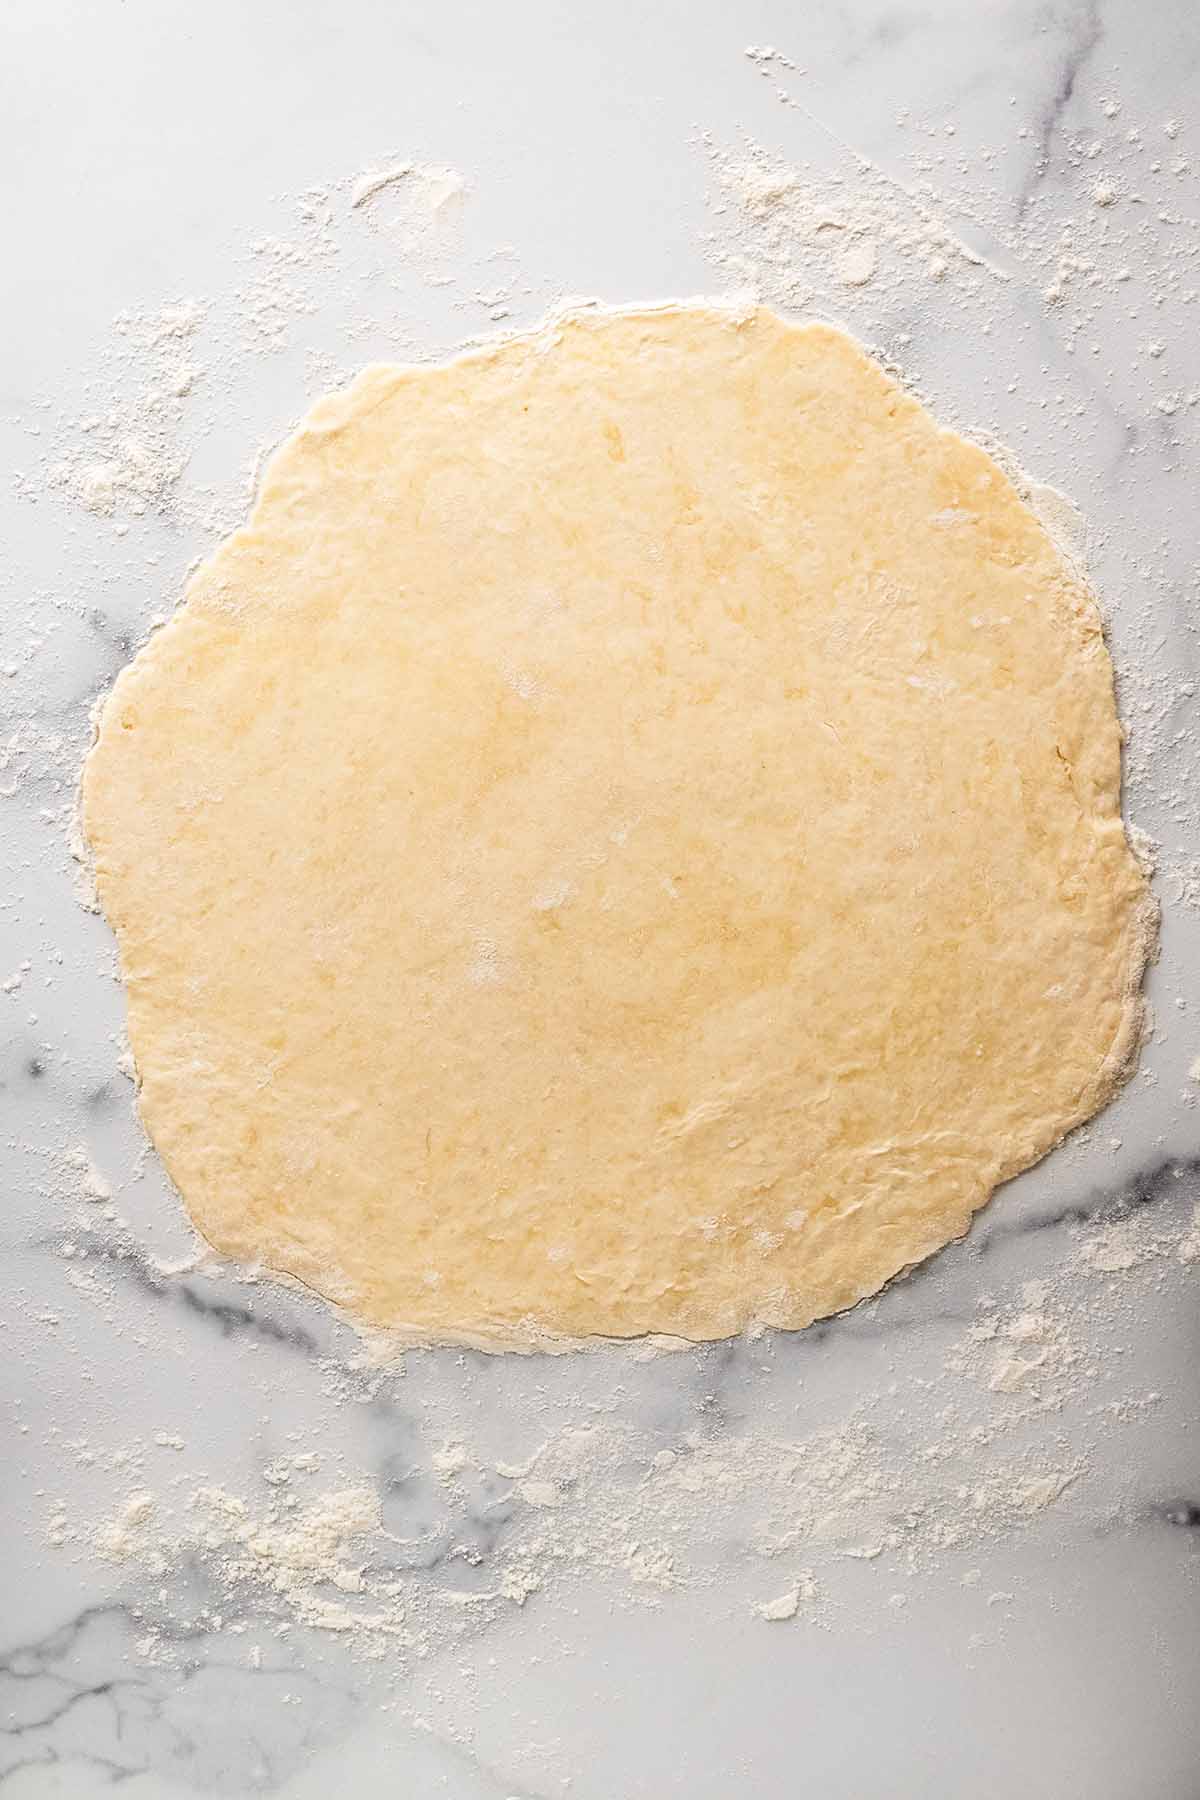 Raw crust dough rolled out to size on floured marble countertop